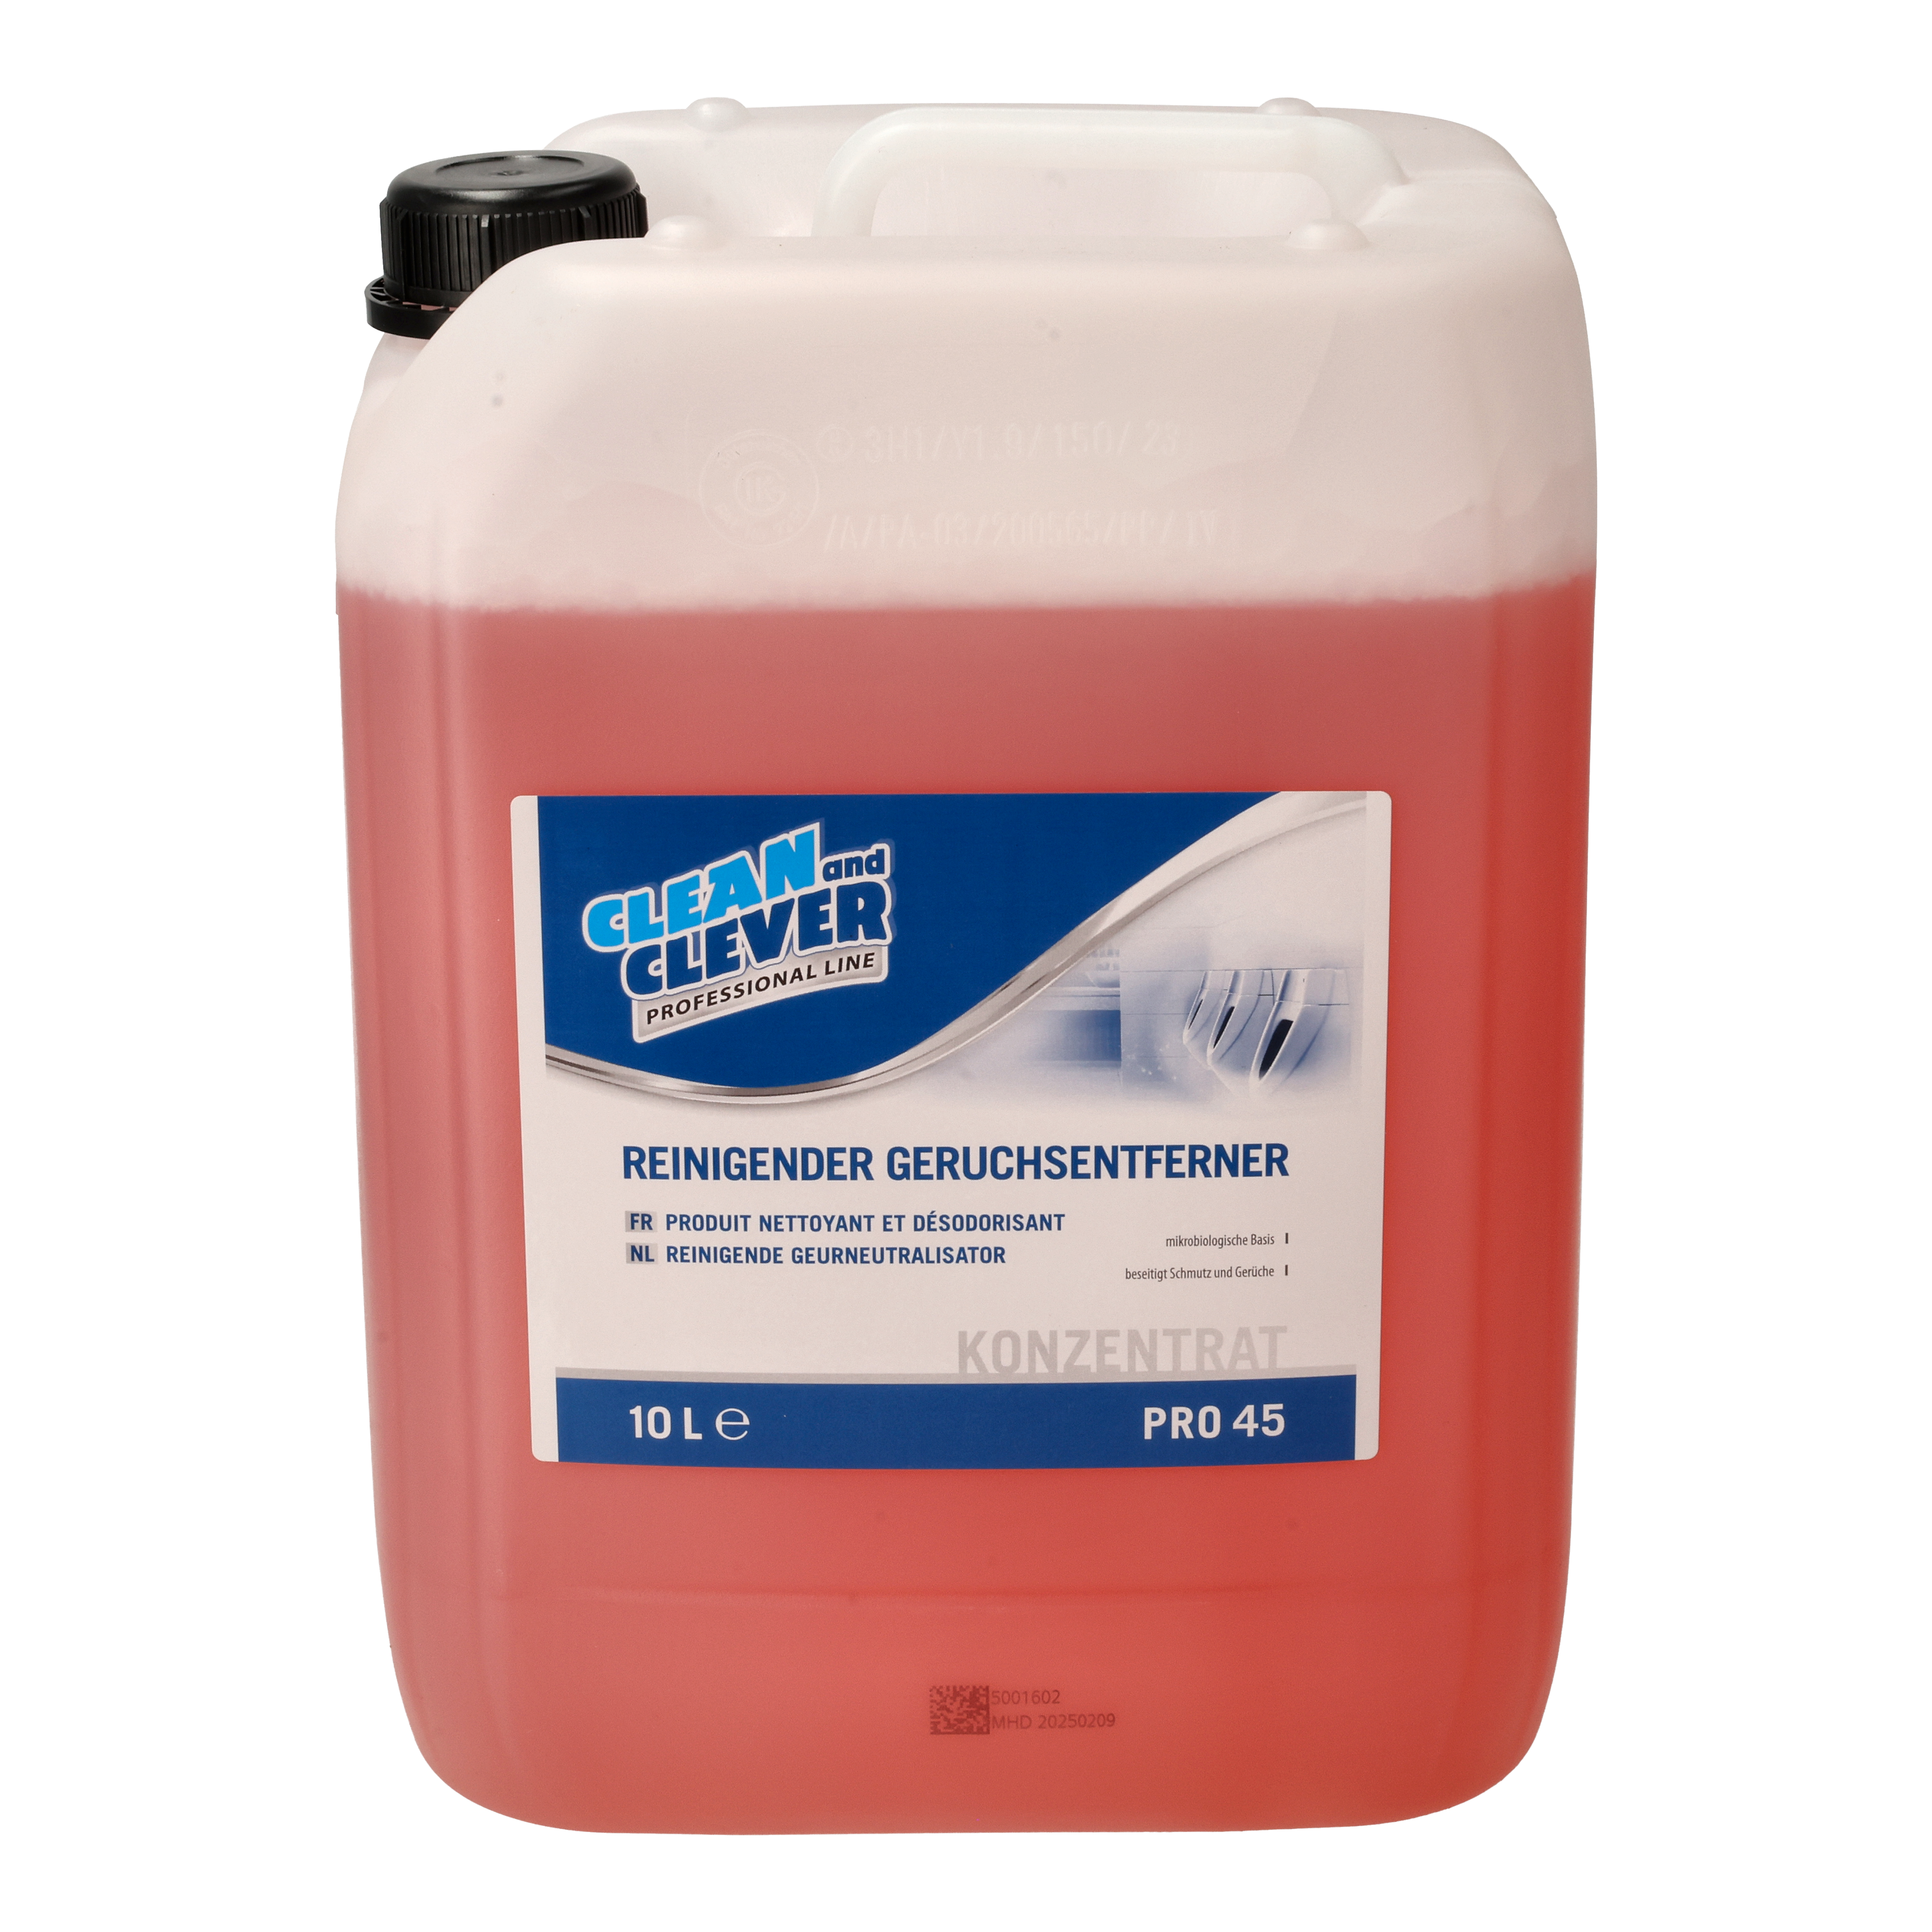 CLEAN and CLEVER PROFESSIONAL Geruchsentferner PRO45 - 10 Liter